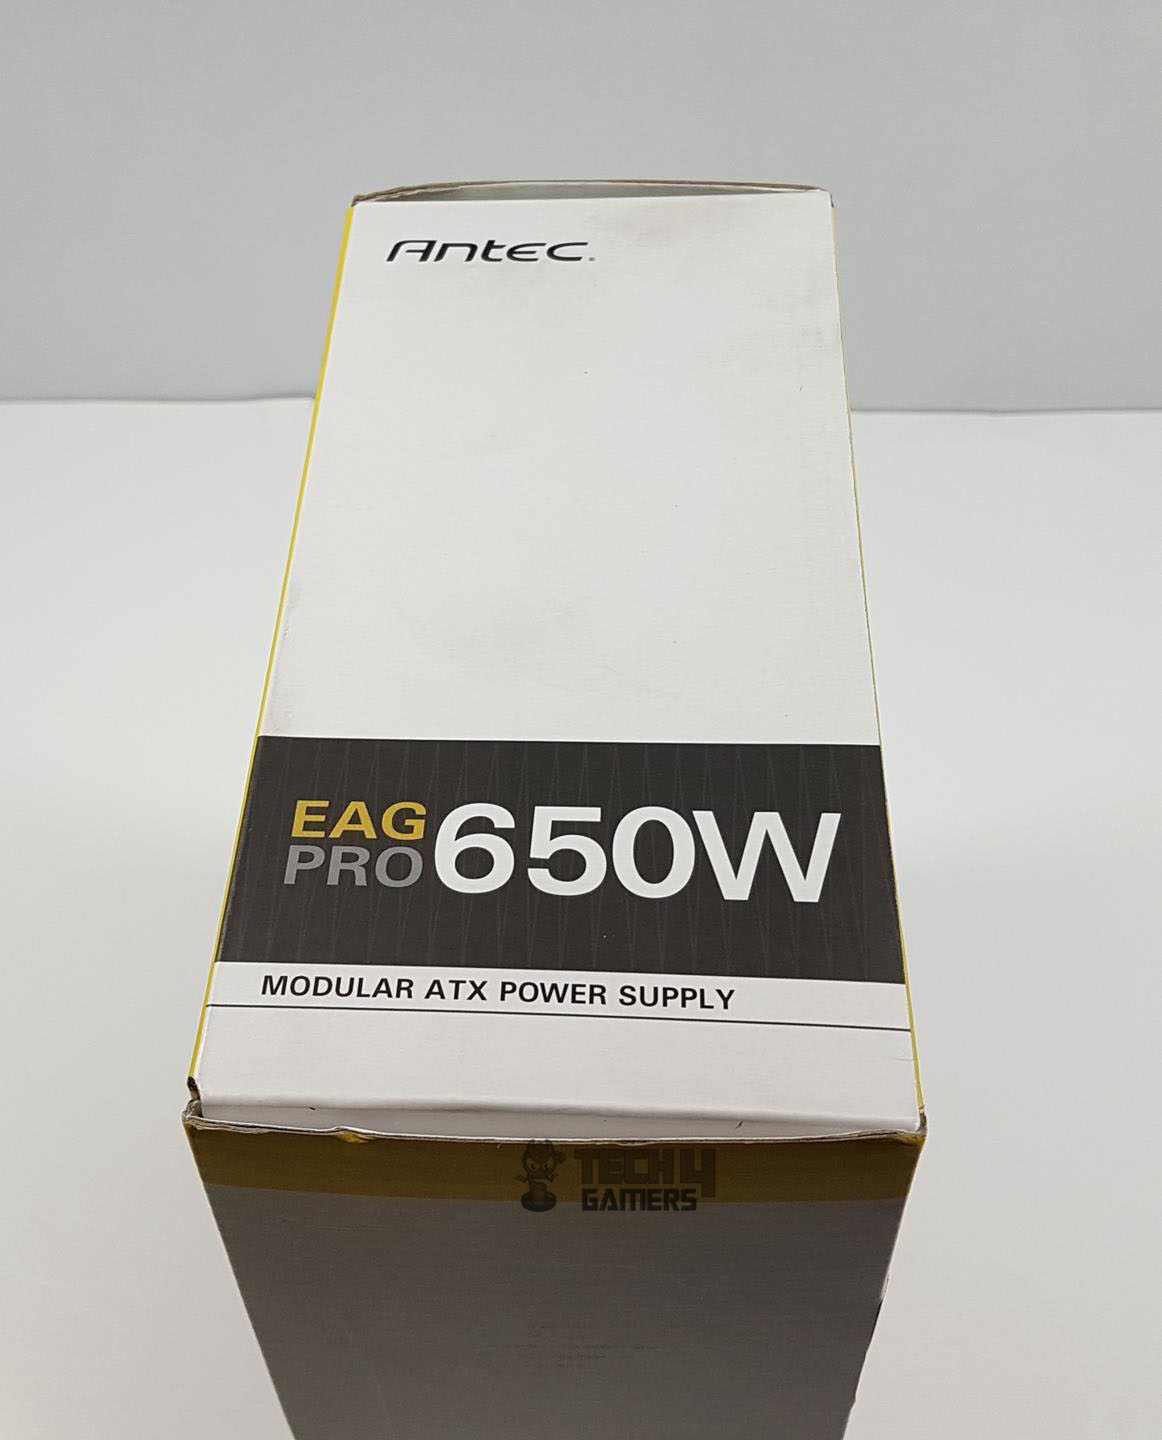 EAG PRO 650W Unboxing